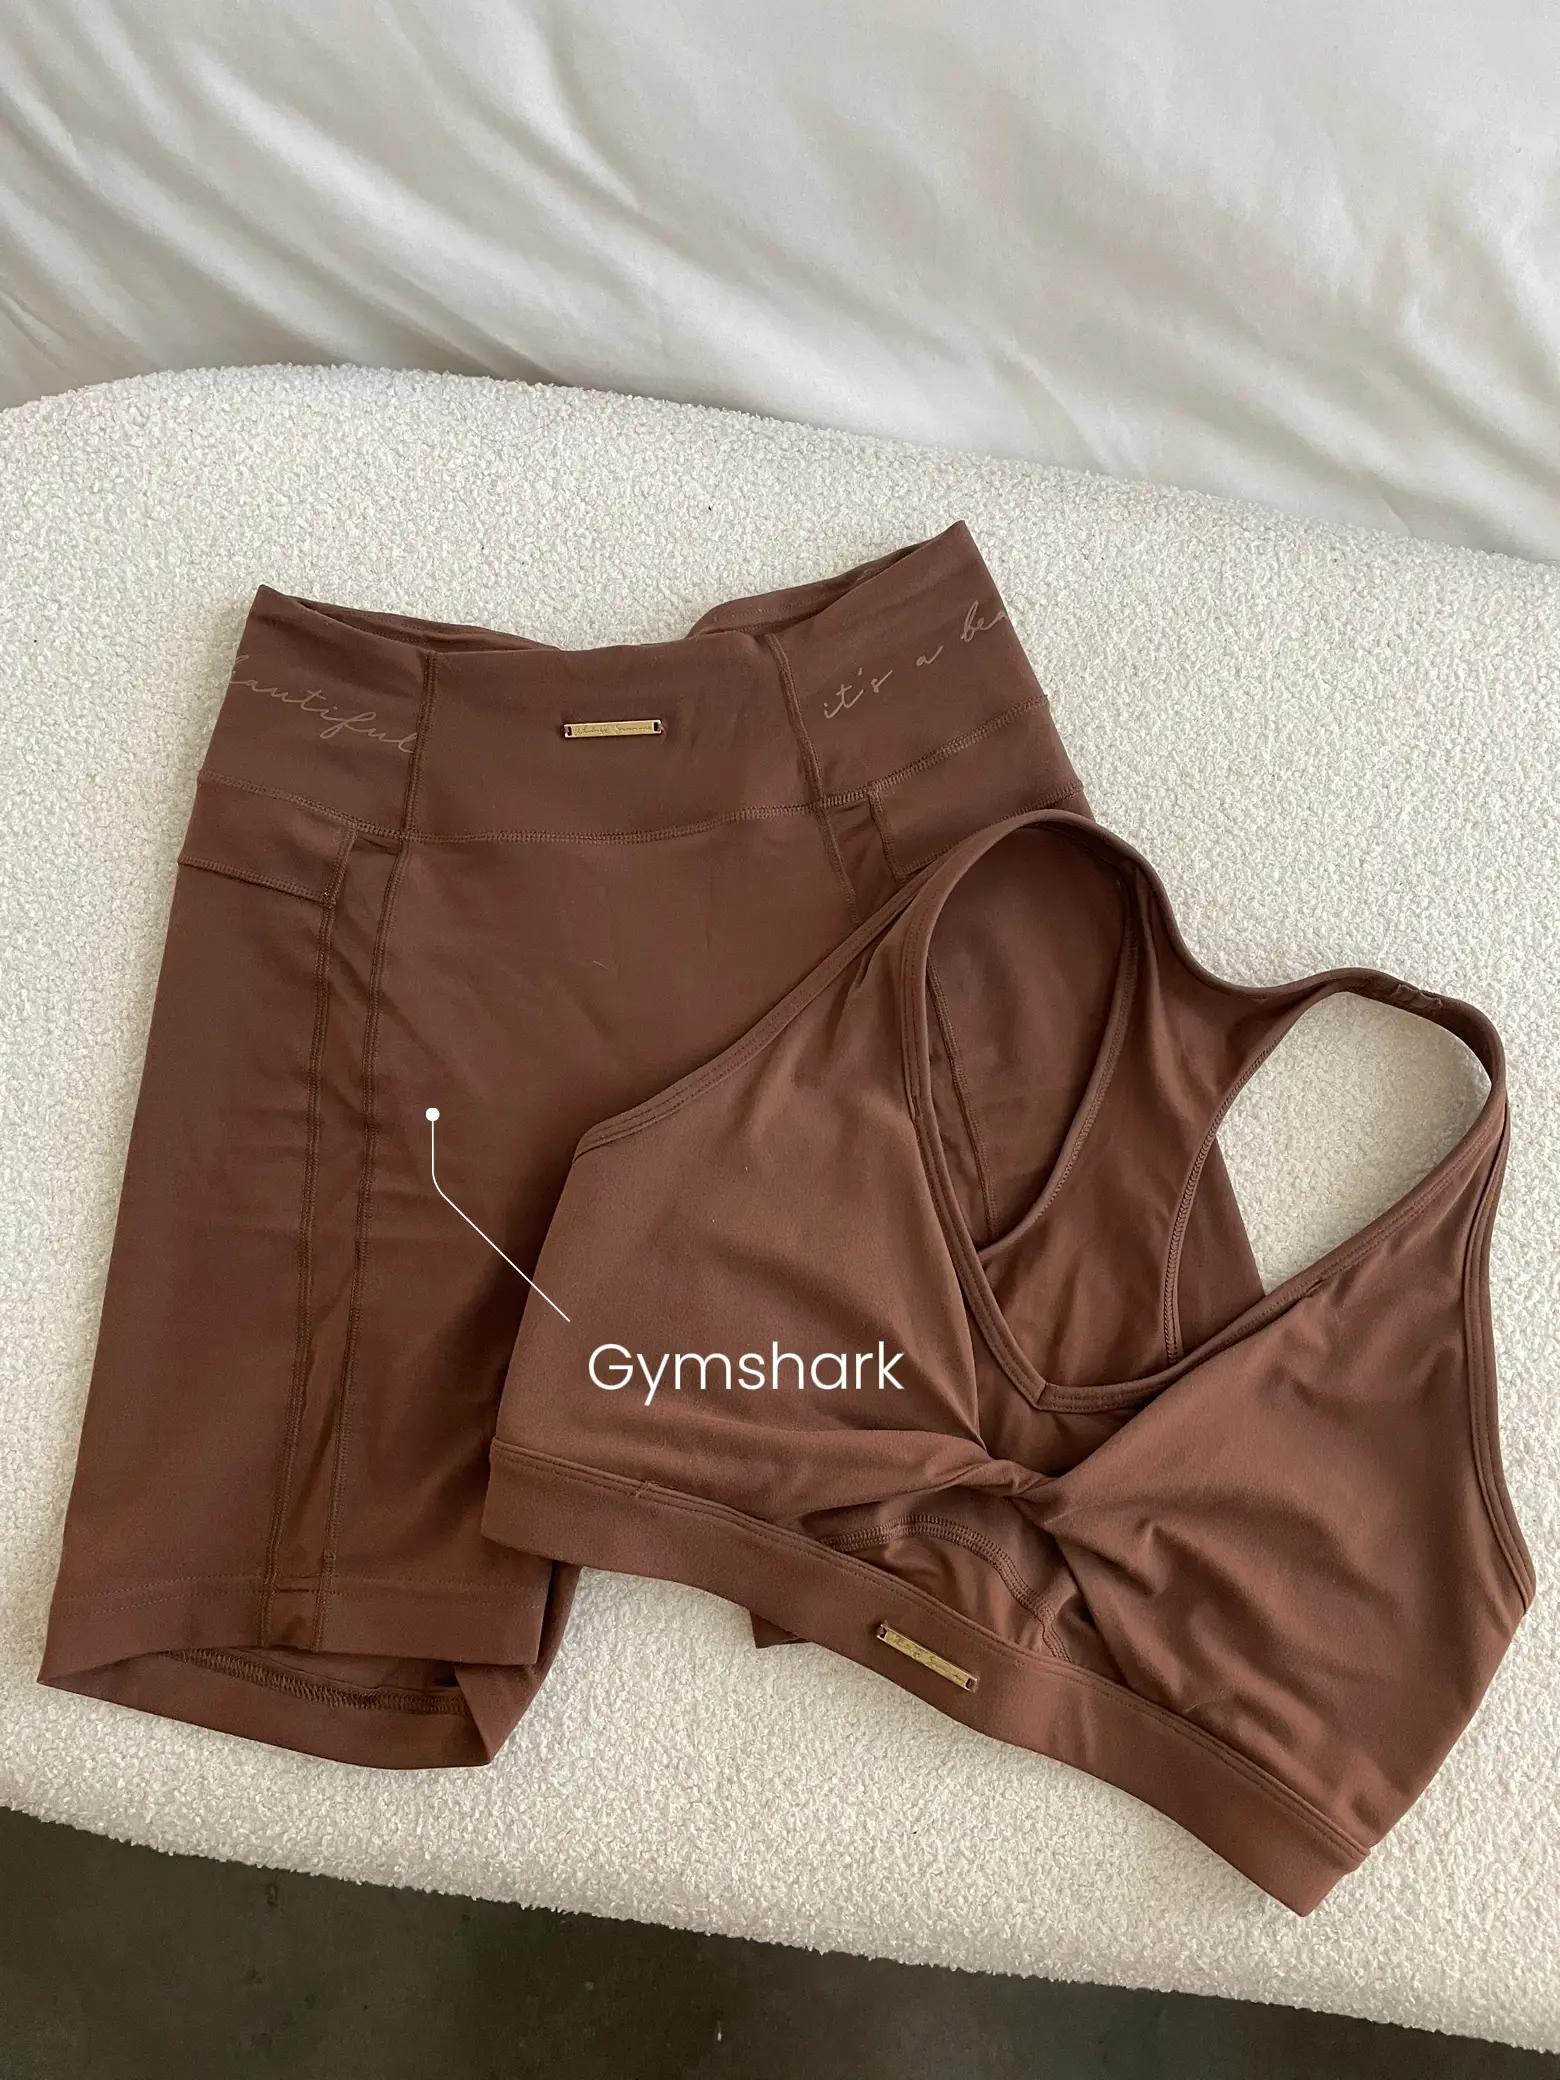 Gymshark Lifting Baby T-Shirt - Copper Brown/Camo Brown